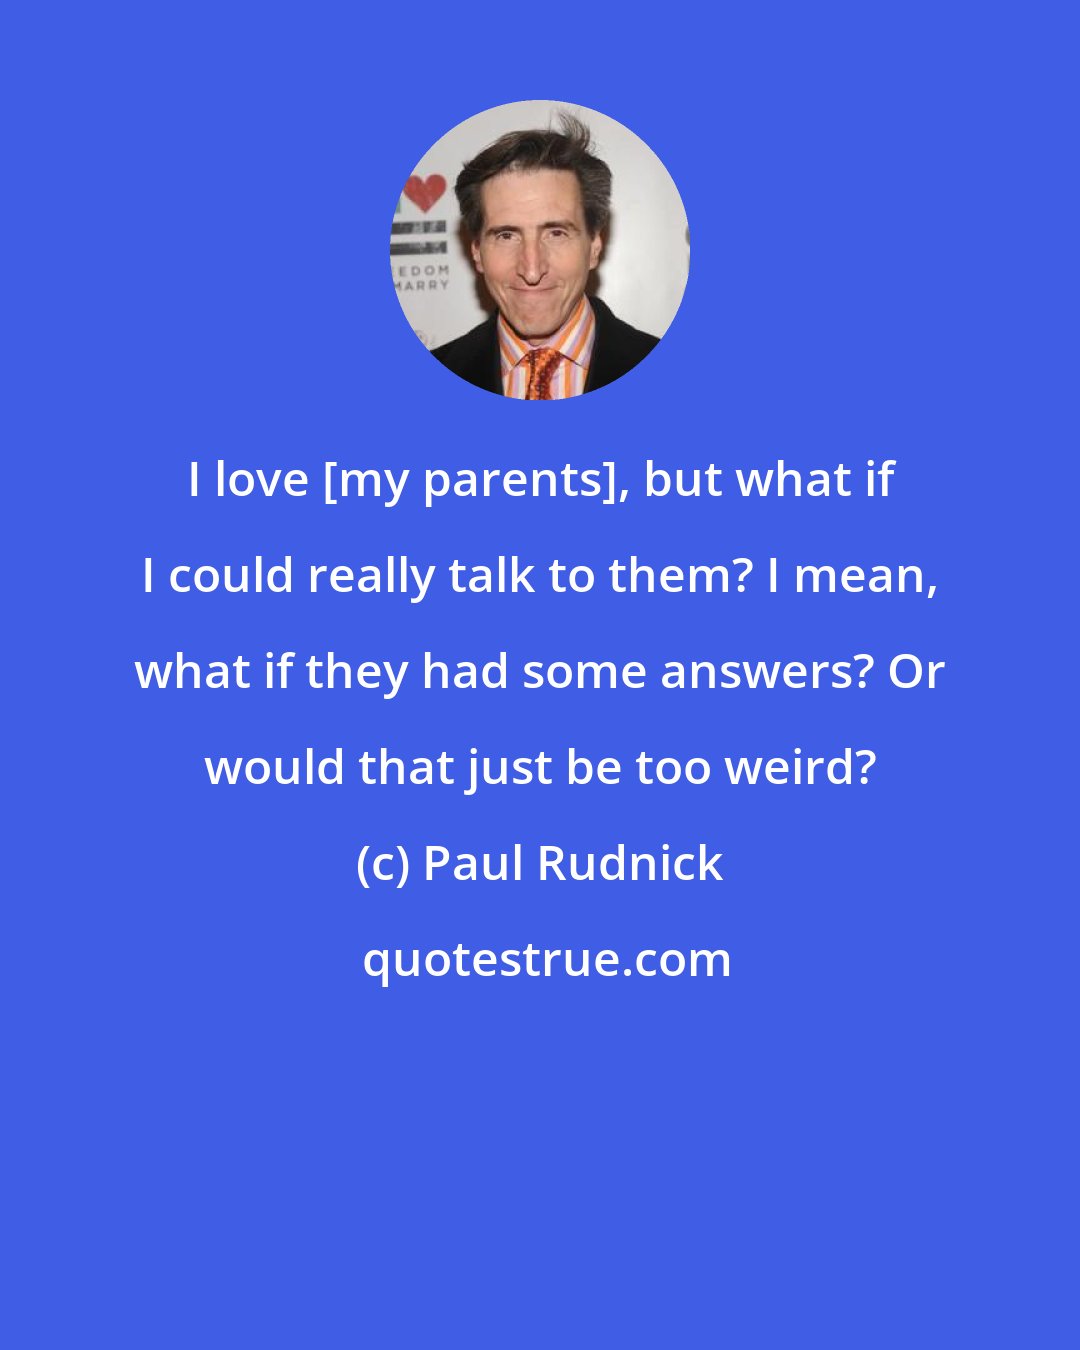 Paul Rudnick: I love [my parents], but what if I could really talk to them? I mean, what if they had some answers? Or would that just be too weird?